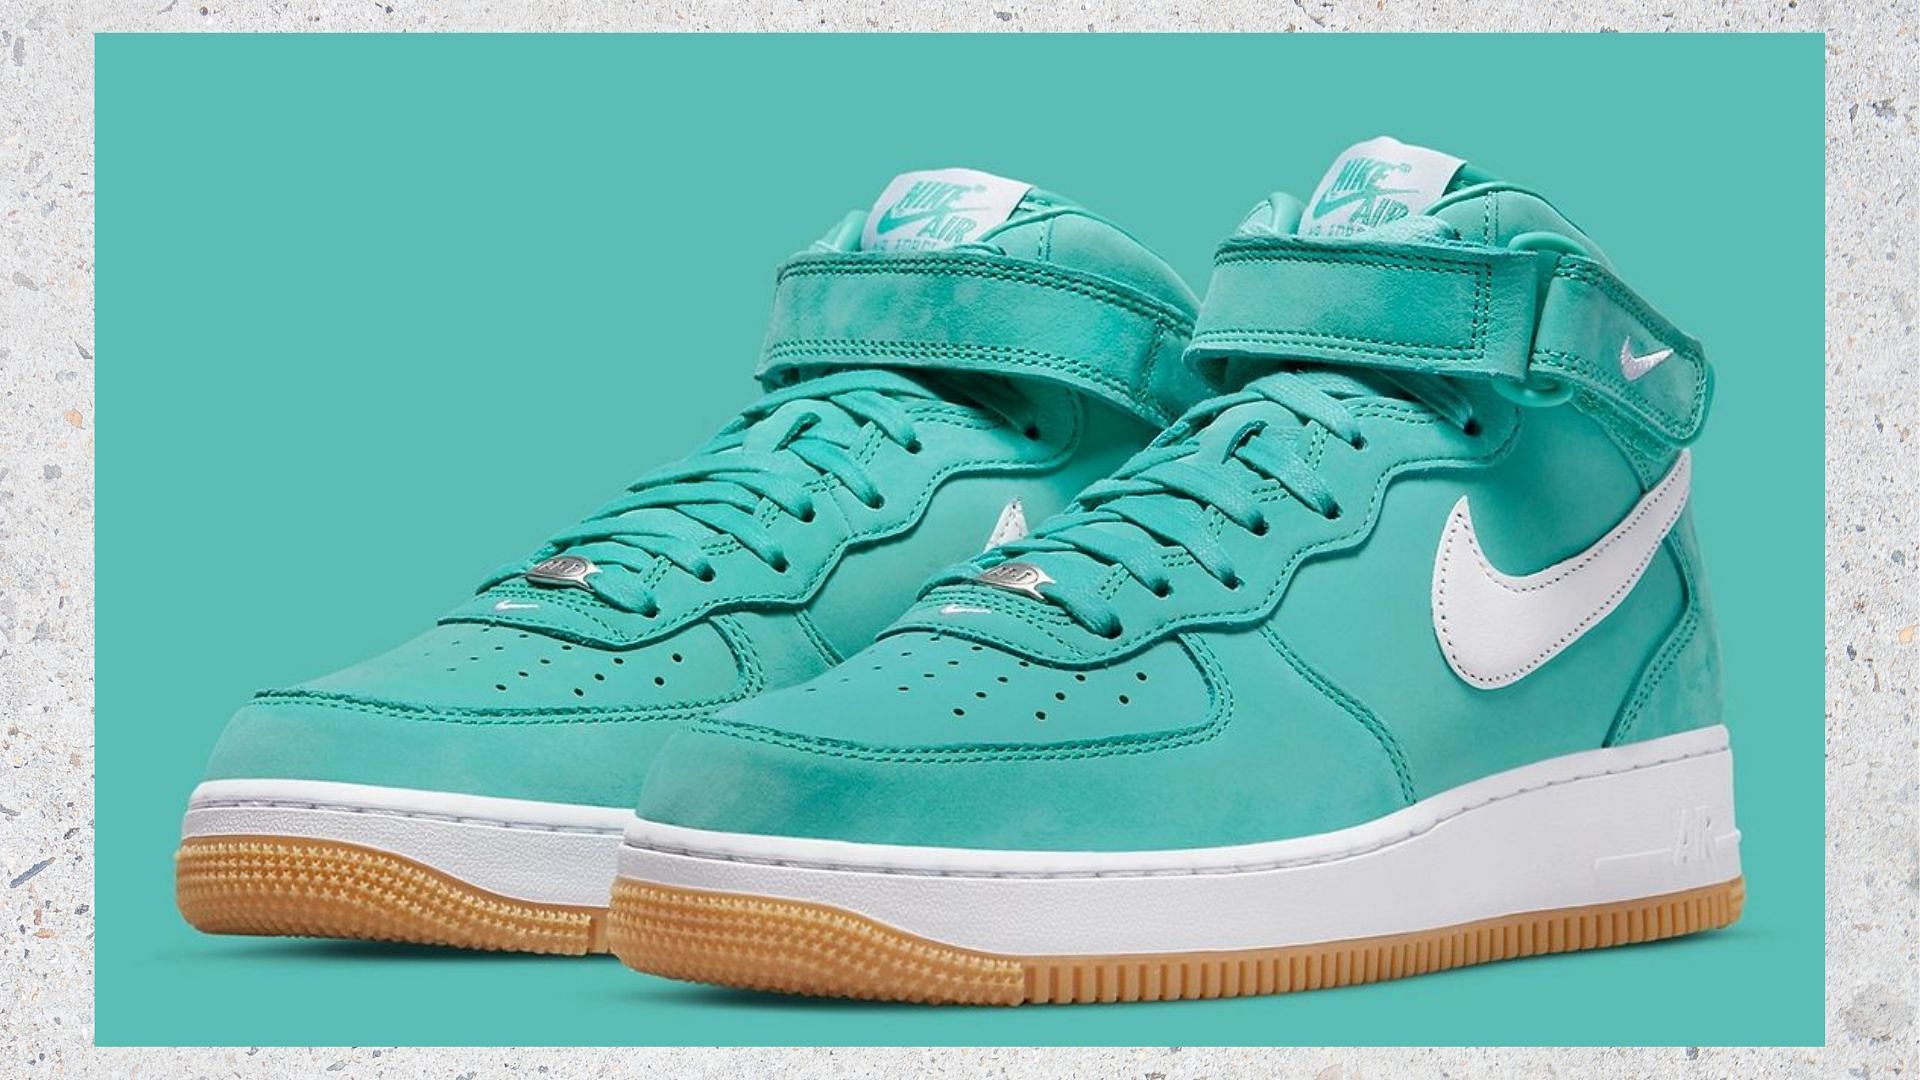 Where to buy Nike Air Force 1 Mid Washed Teal shoes? Price, release date,  and more details explored